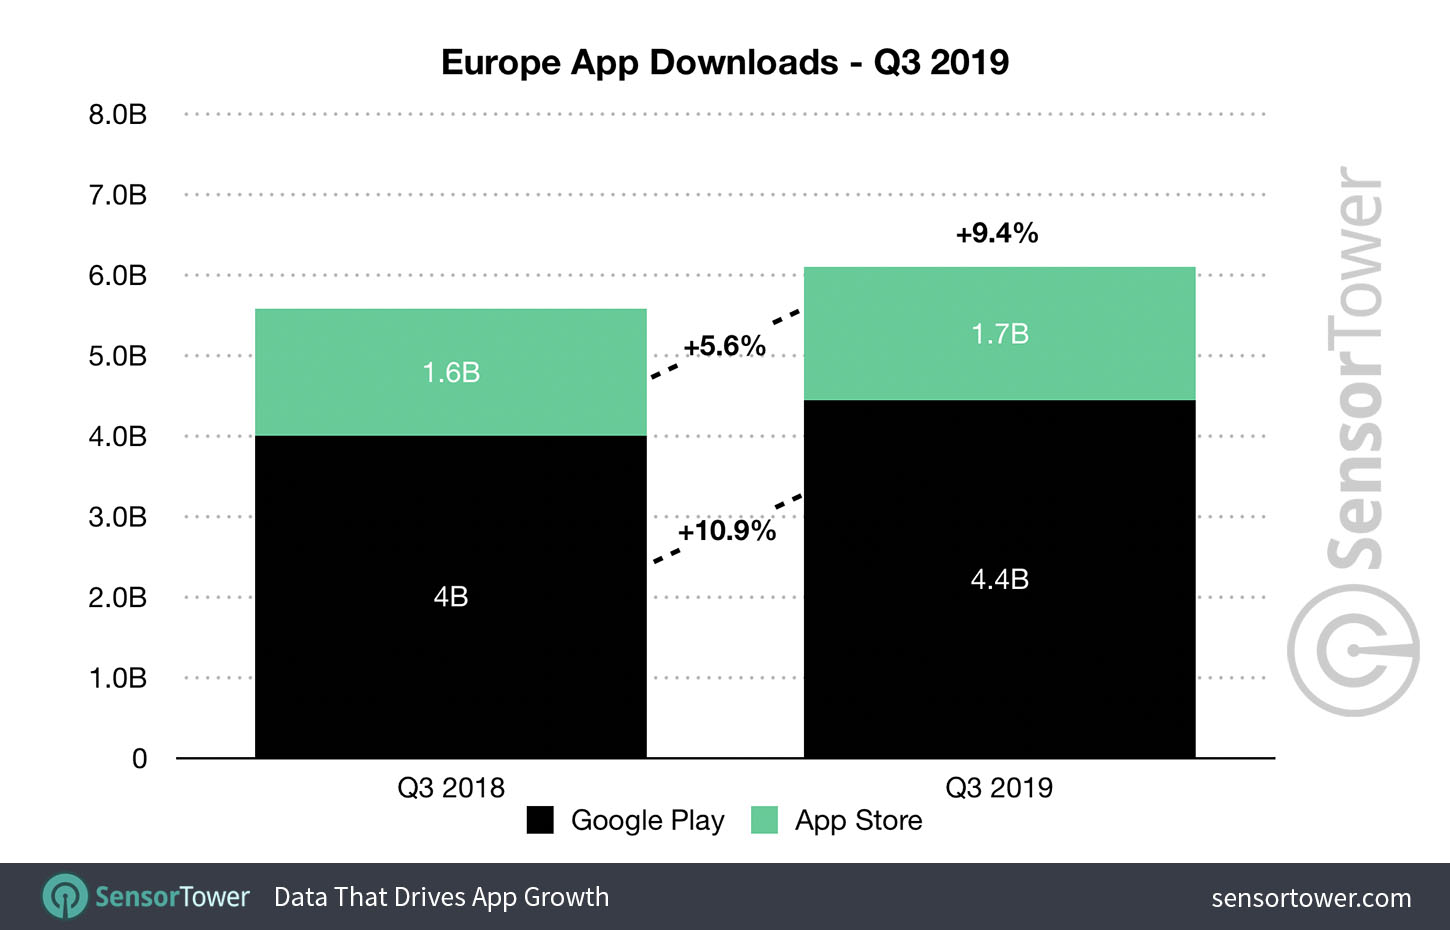 Q3 2019 Mobile App Downloads for Europe